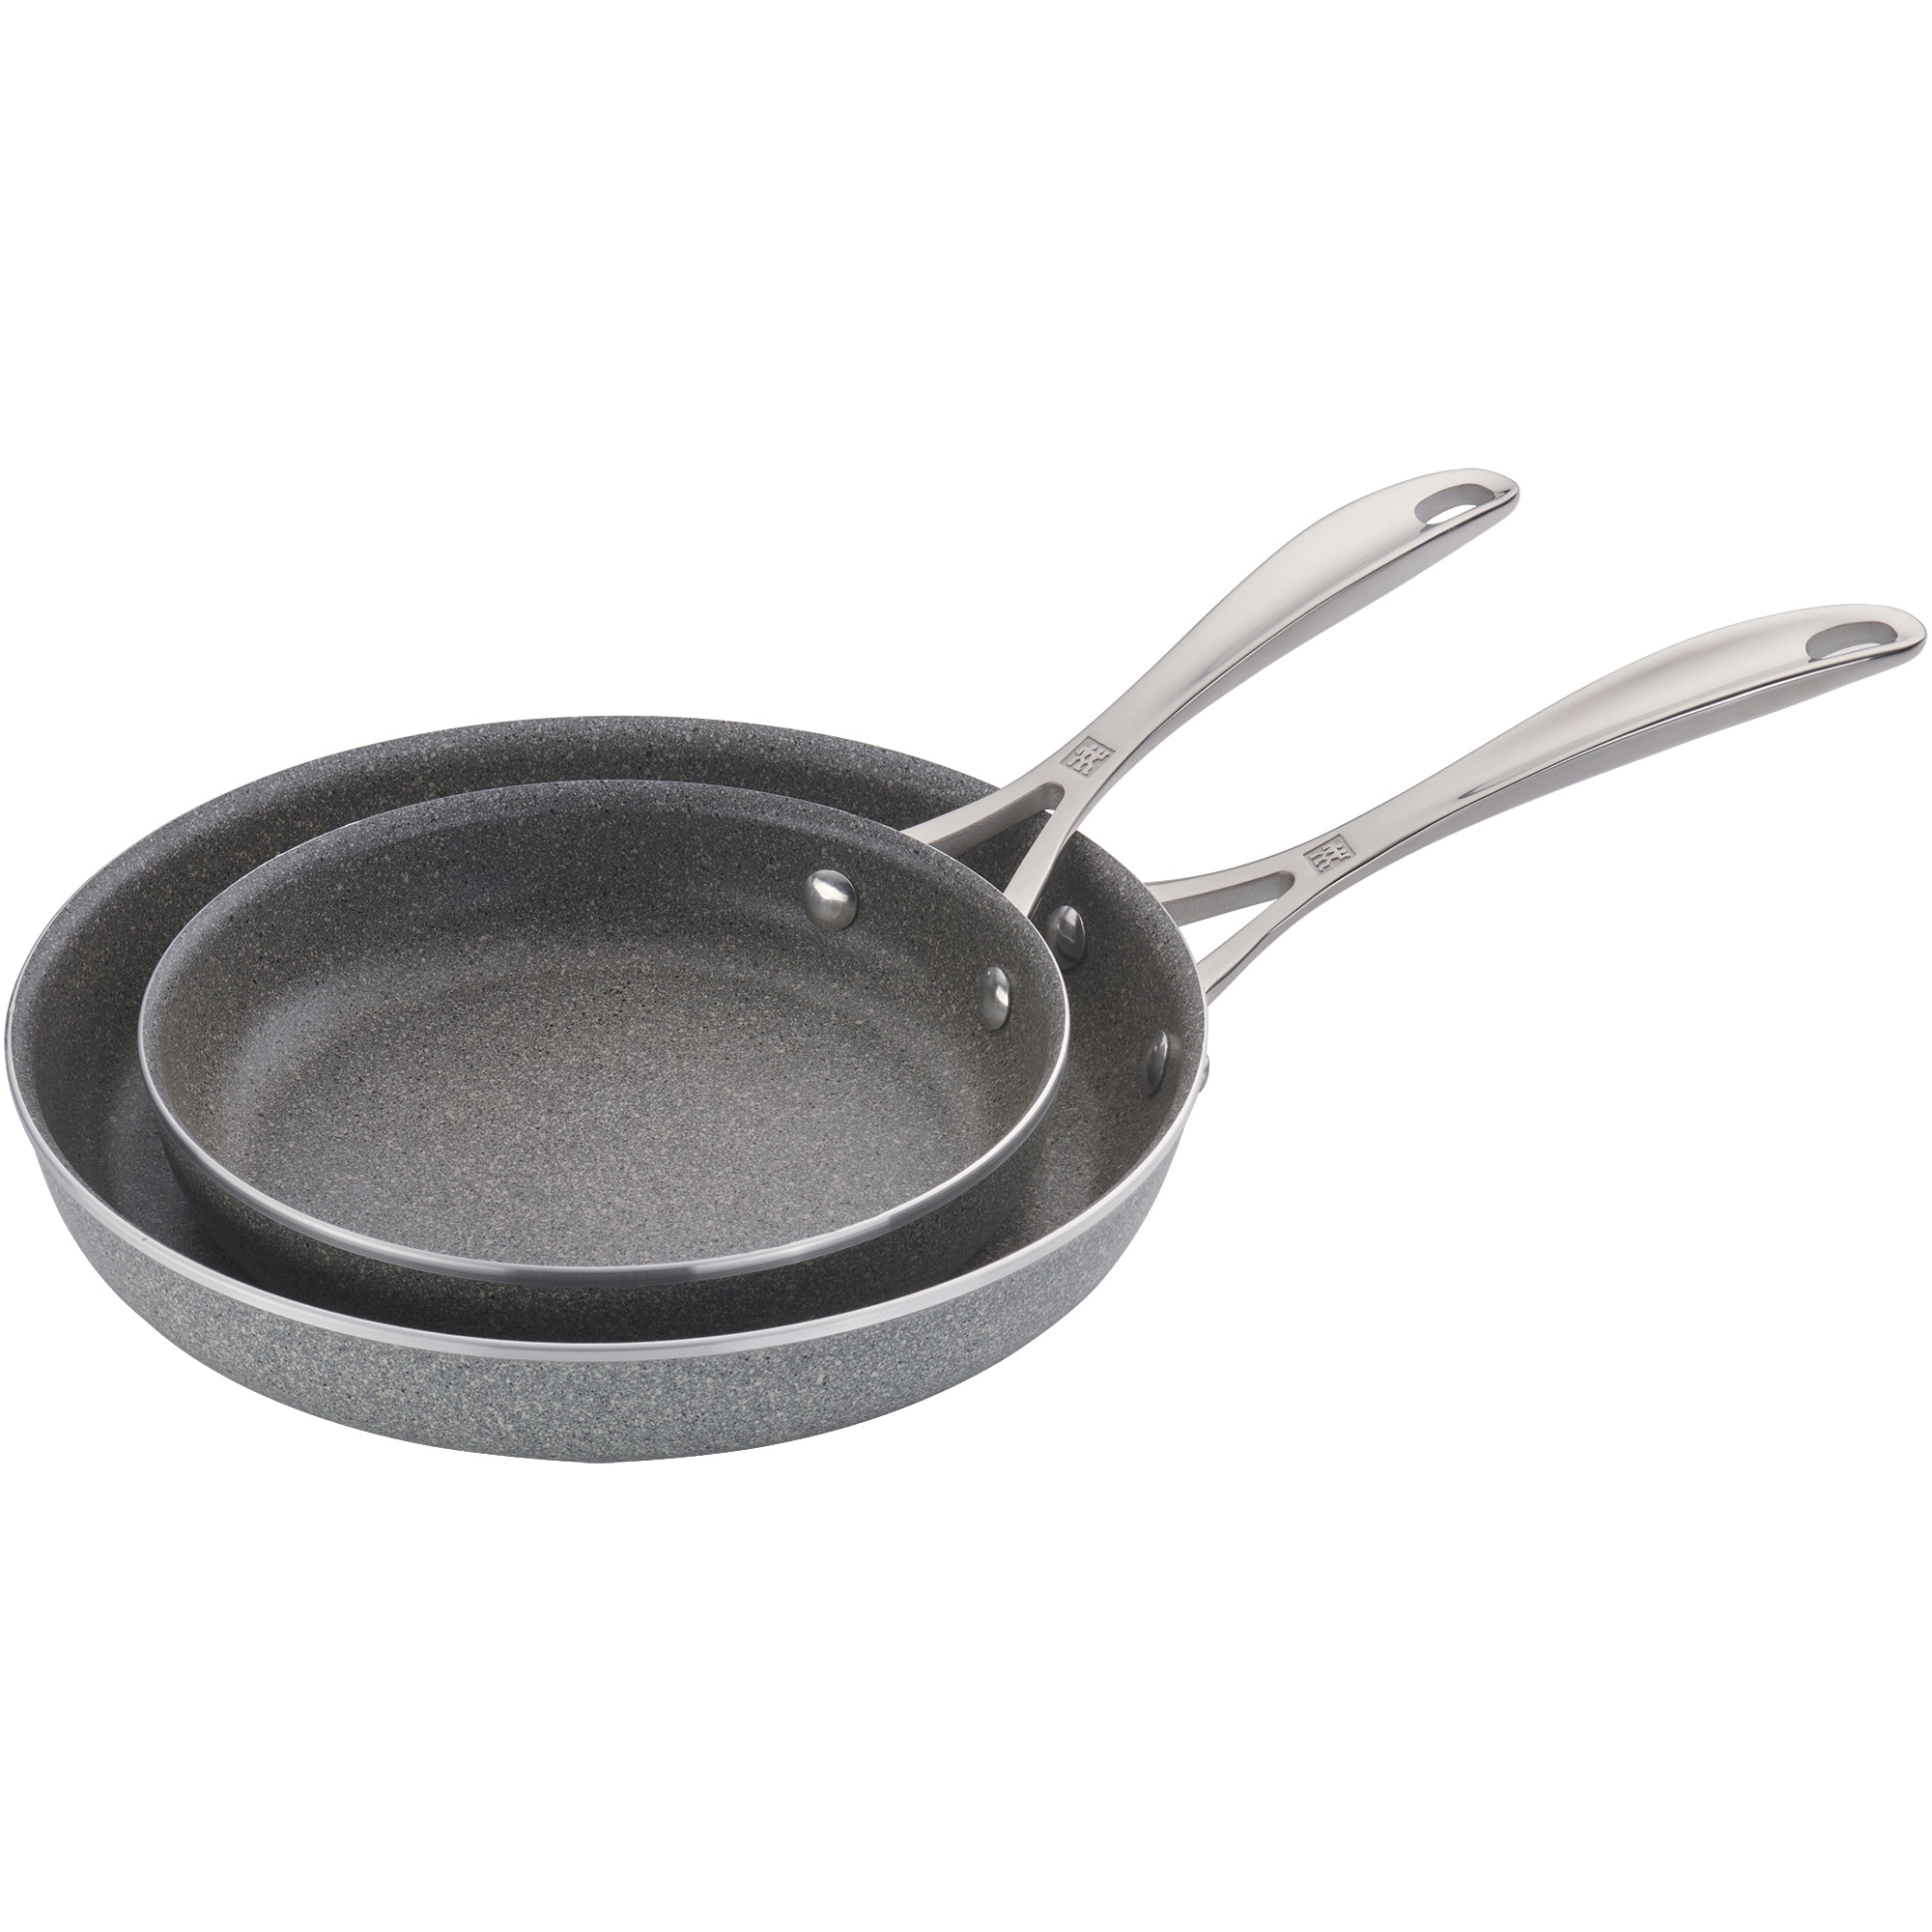 Chef's Secret Stovetop Griddle Pan - Stainless Steel Nonstick